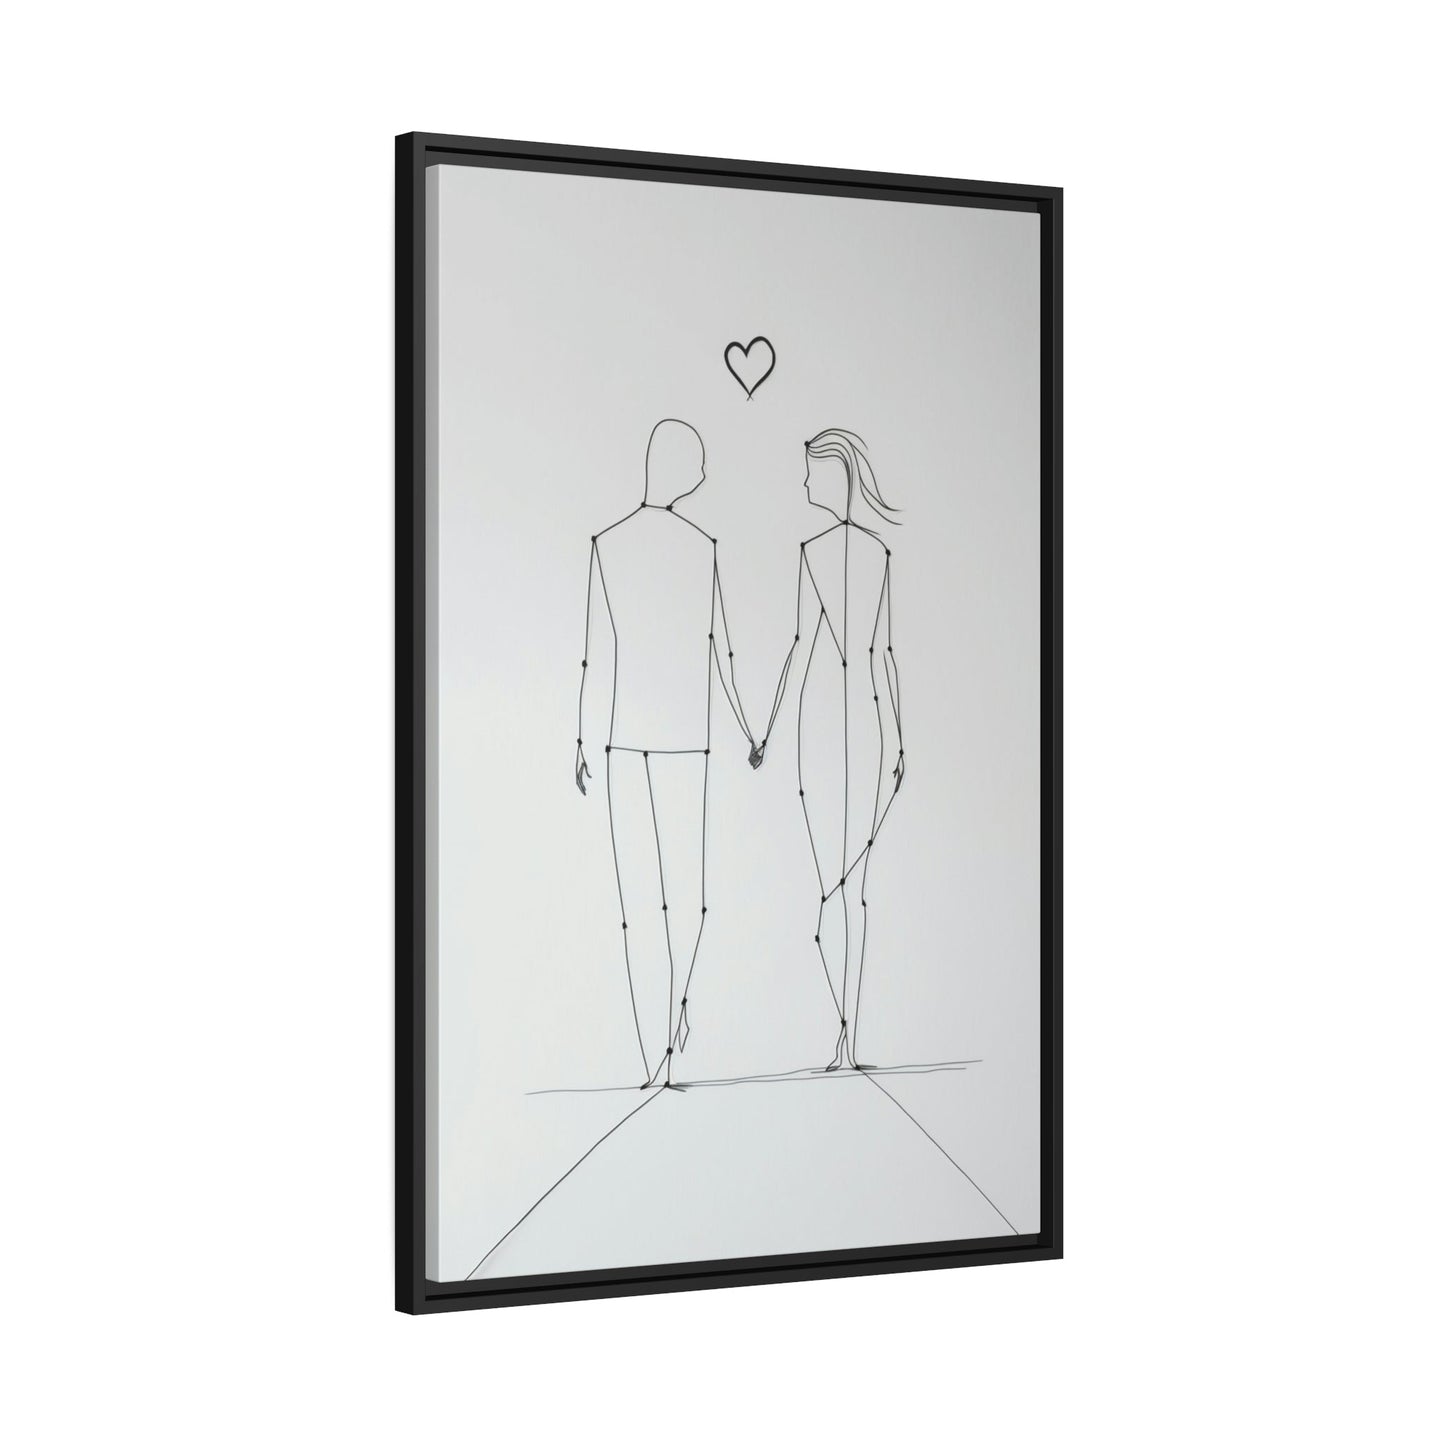 The Art of Lines: A Framed Poster & Canvas Print of an Abstract Line Artwork